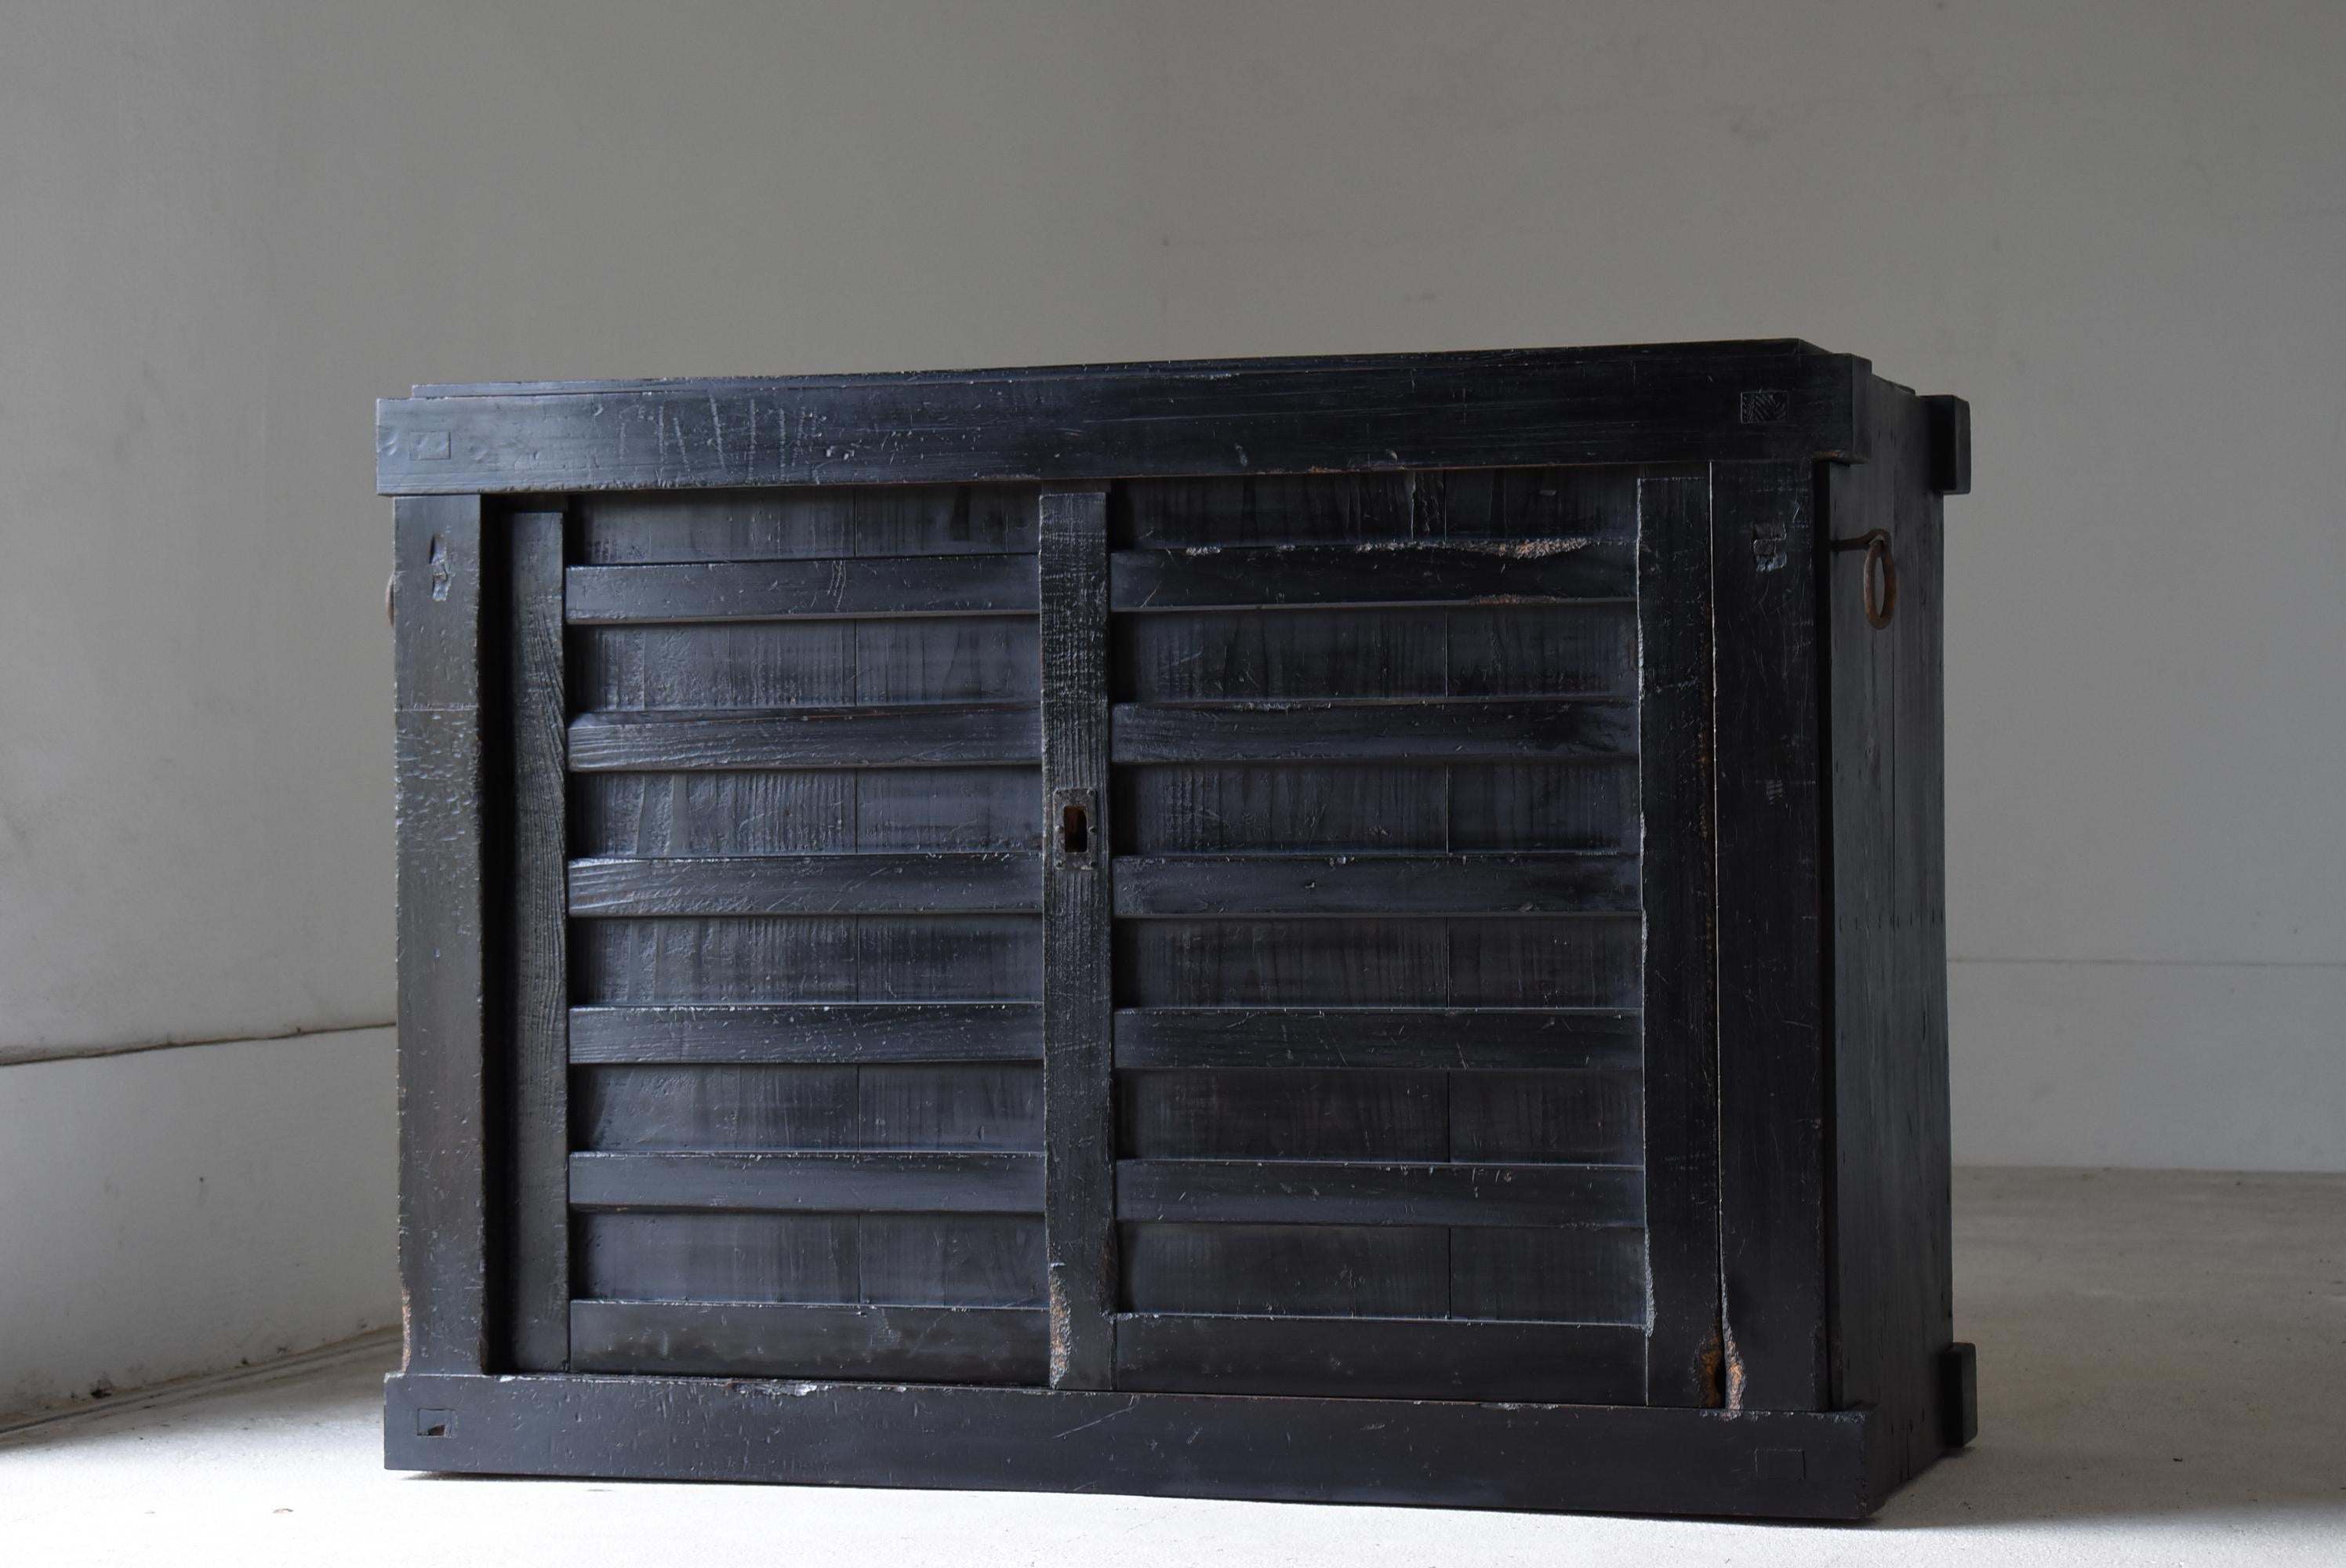 This is an old Japanese black large tansu.
It is from the Meiji period (1860s-1900s).
It is made of cedar wood.

This furniture has a story.
This seems to have been used as a safe (valuables box) in those days.
To prevent theft from thieves, the